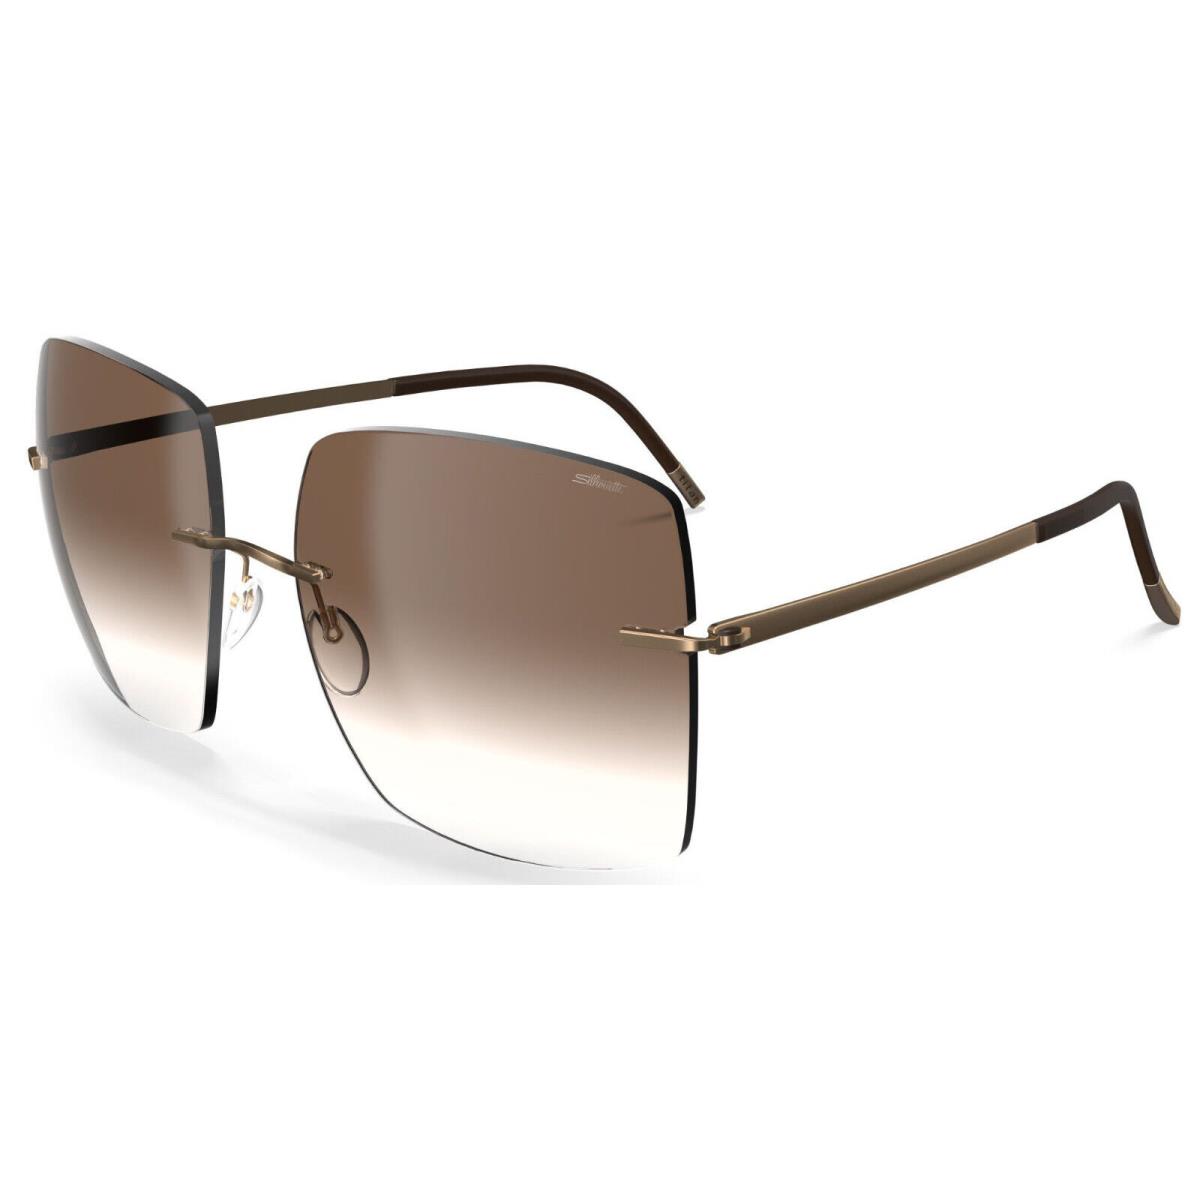 Silhouette Sunglasses Cadaques Gold 60MM-17MM-135MM 8191/75-7530